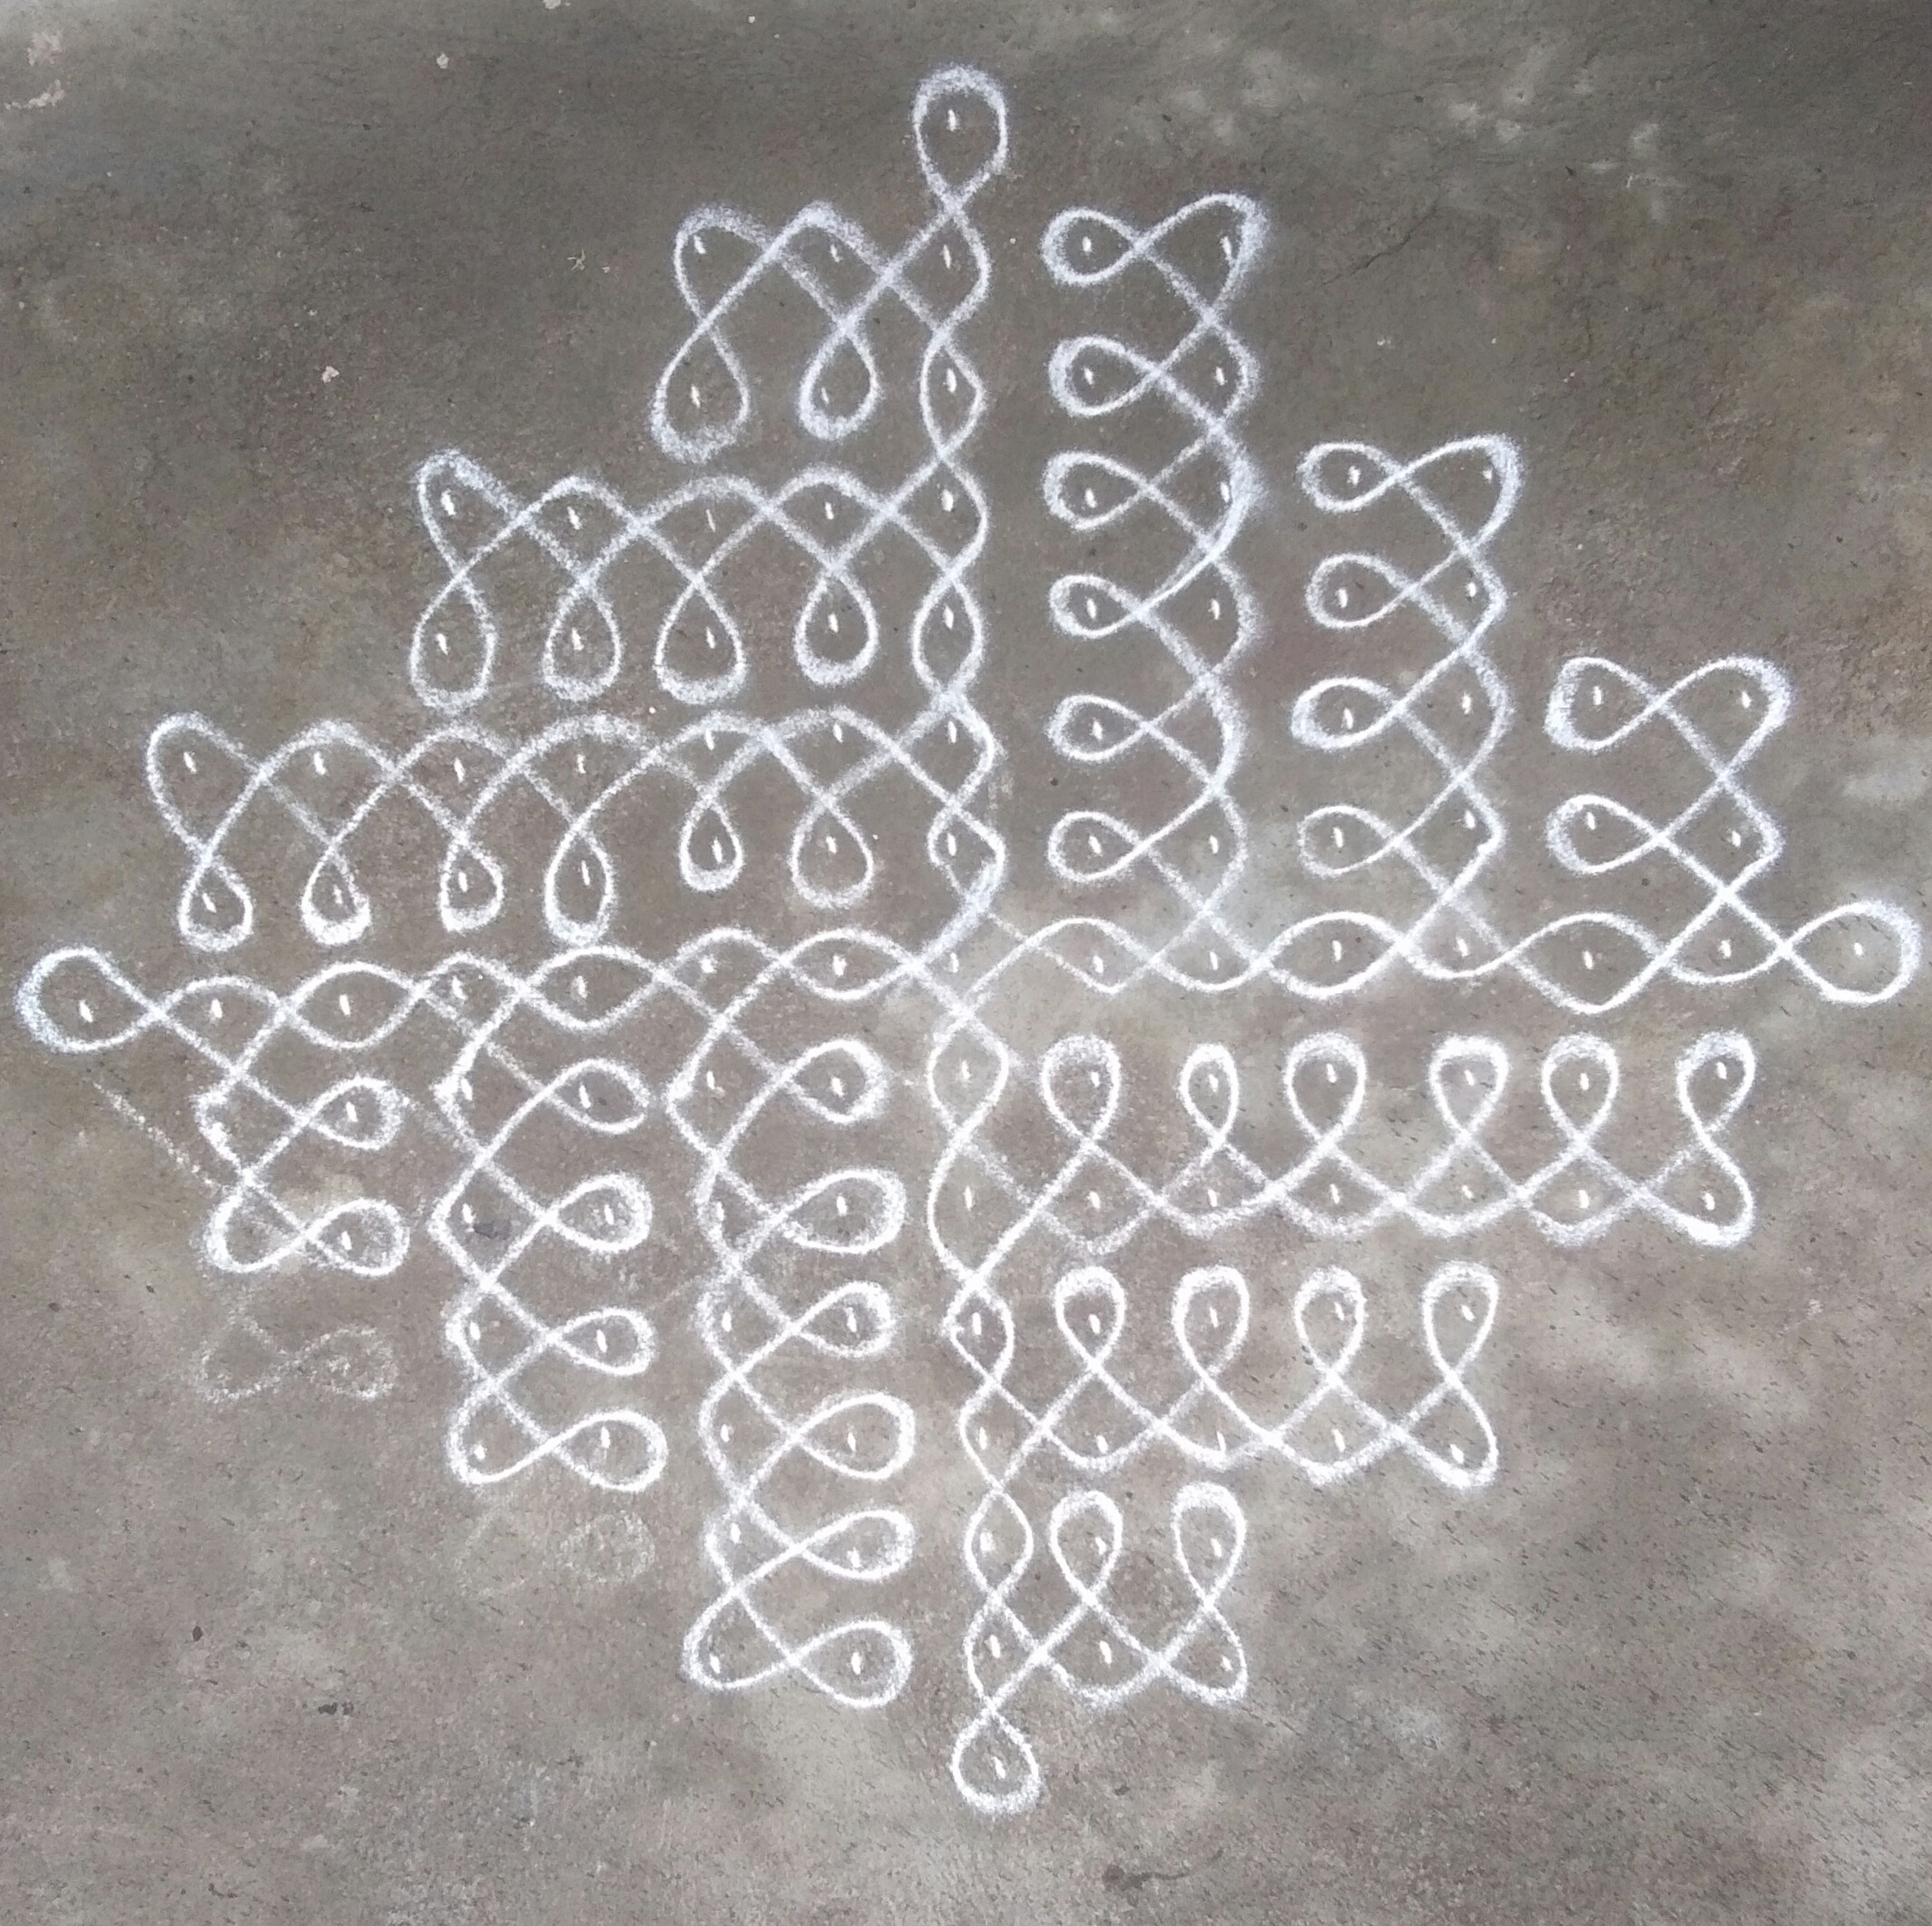 Contest Sikku kolam with 15 dots 